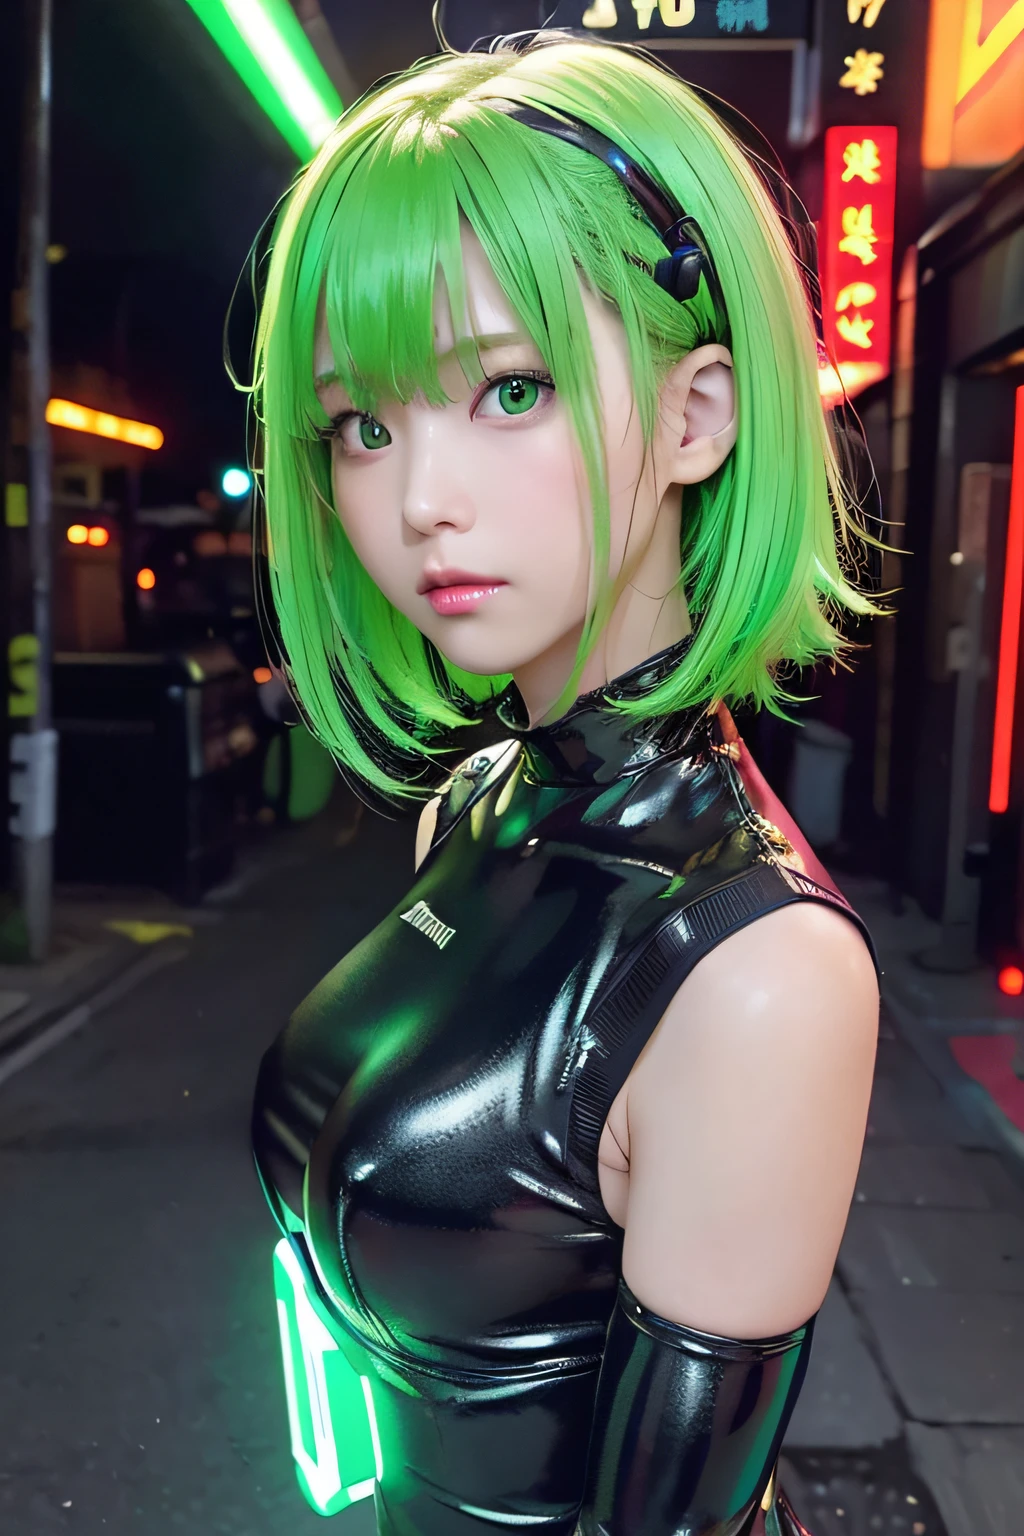 Neon Noir Beautiful Female Semi Robot,run、Looking at Viewer, . Cyberpunk, ((Dark)), Back alley, neon signs, High contrast, low illuminance, Vibrant, Highly detailed, (Green Ash Hair Color), Luminous Eyes、 with an elementary school face、Slimed、flat body、Background blur